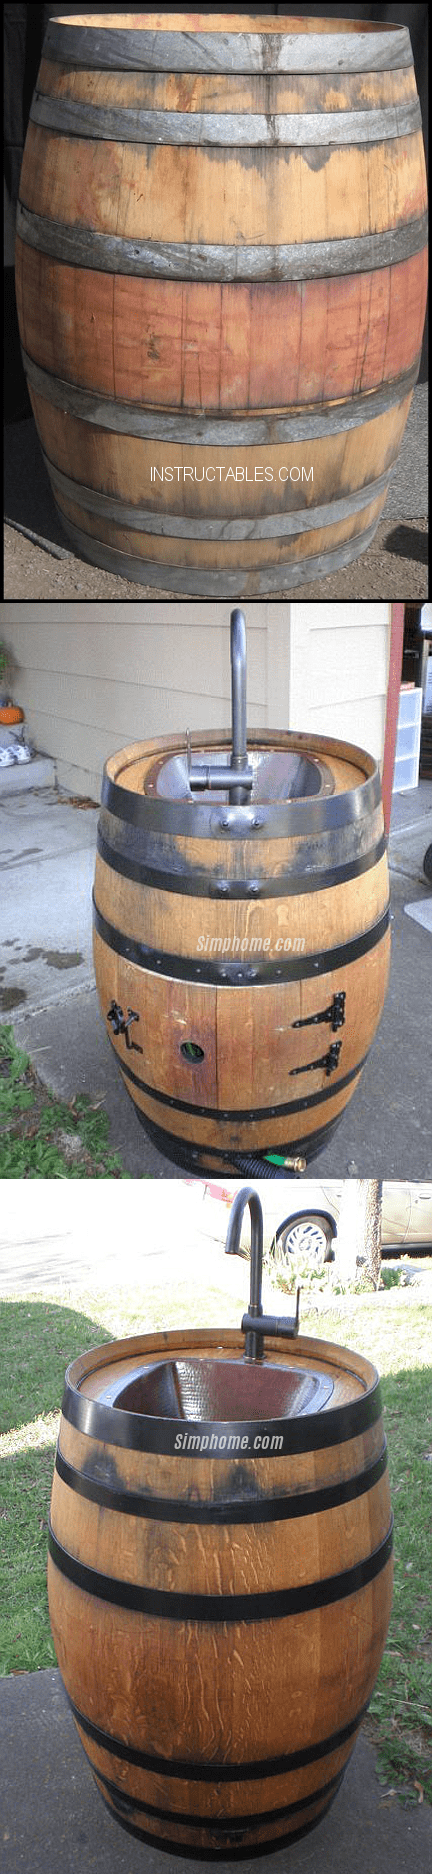 1.Simphome.com Turn an Old Wine Barrel into an Outdoor Sink